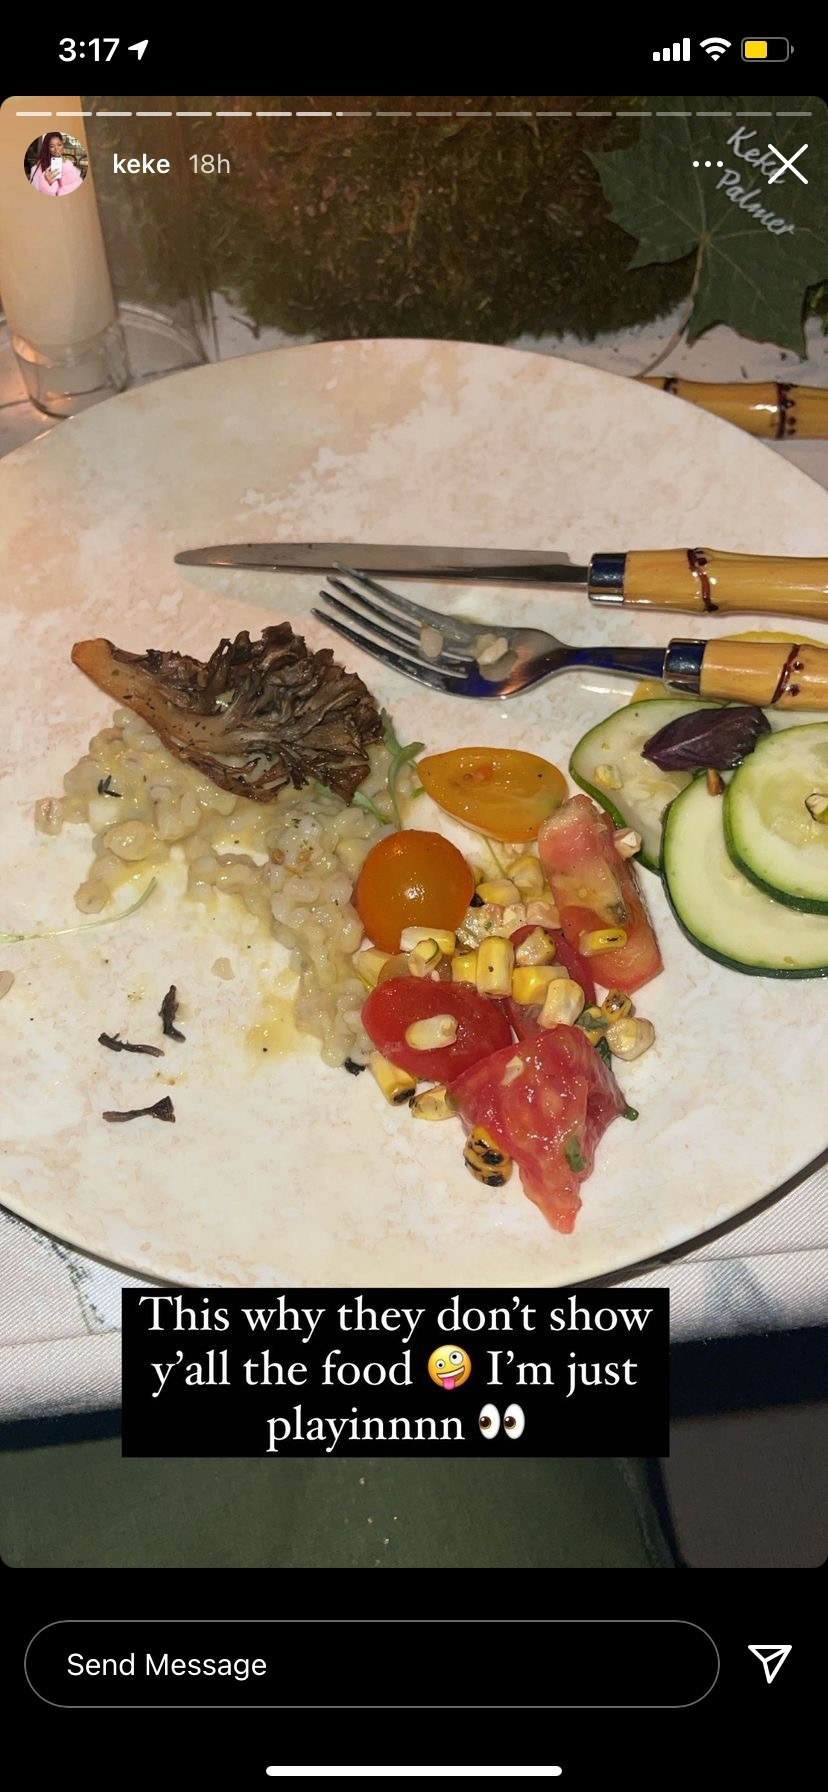 Her plate had the remnants of what looked like grape tomatoes, corn, cucumbers, and what looks like mushrooms